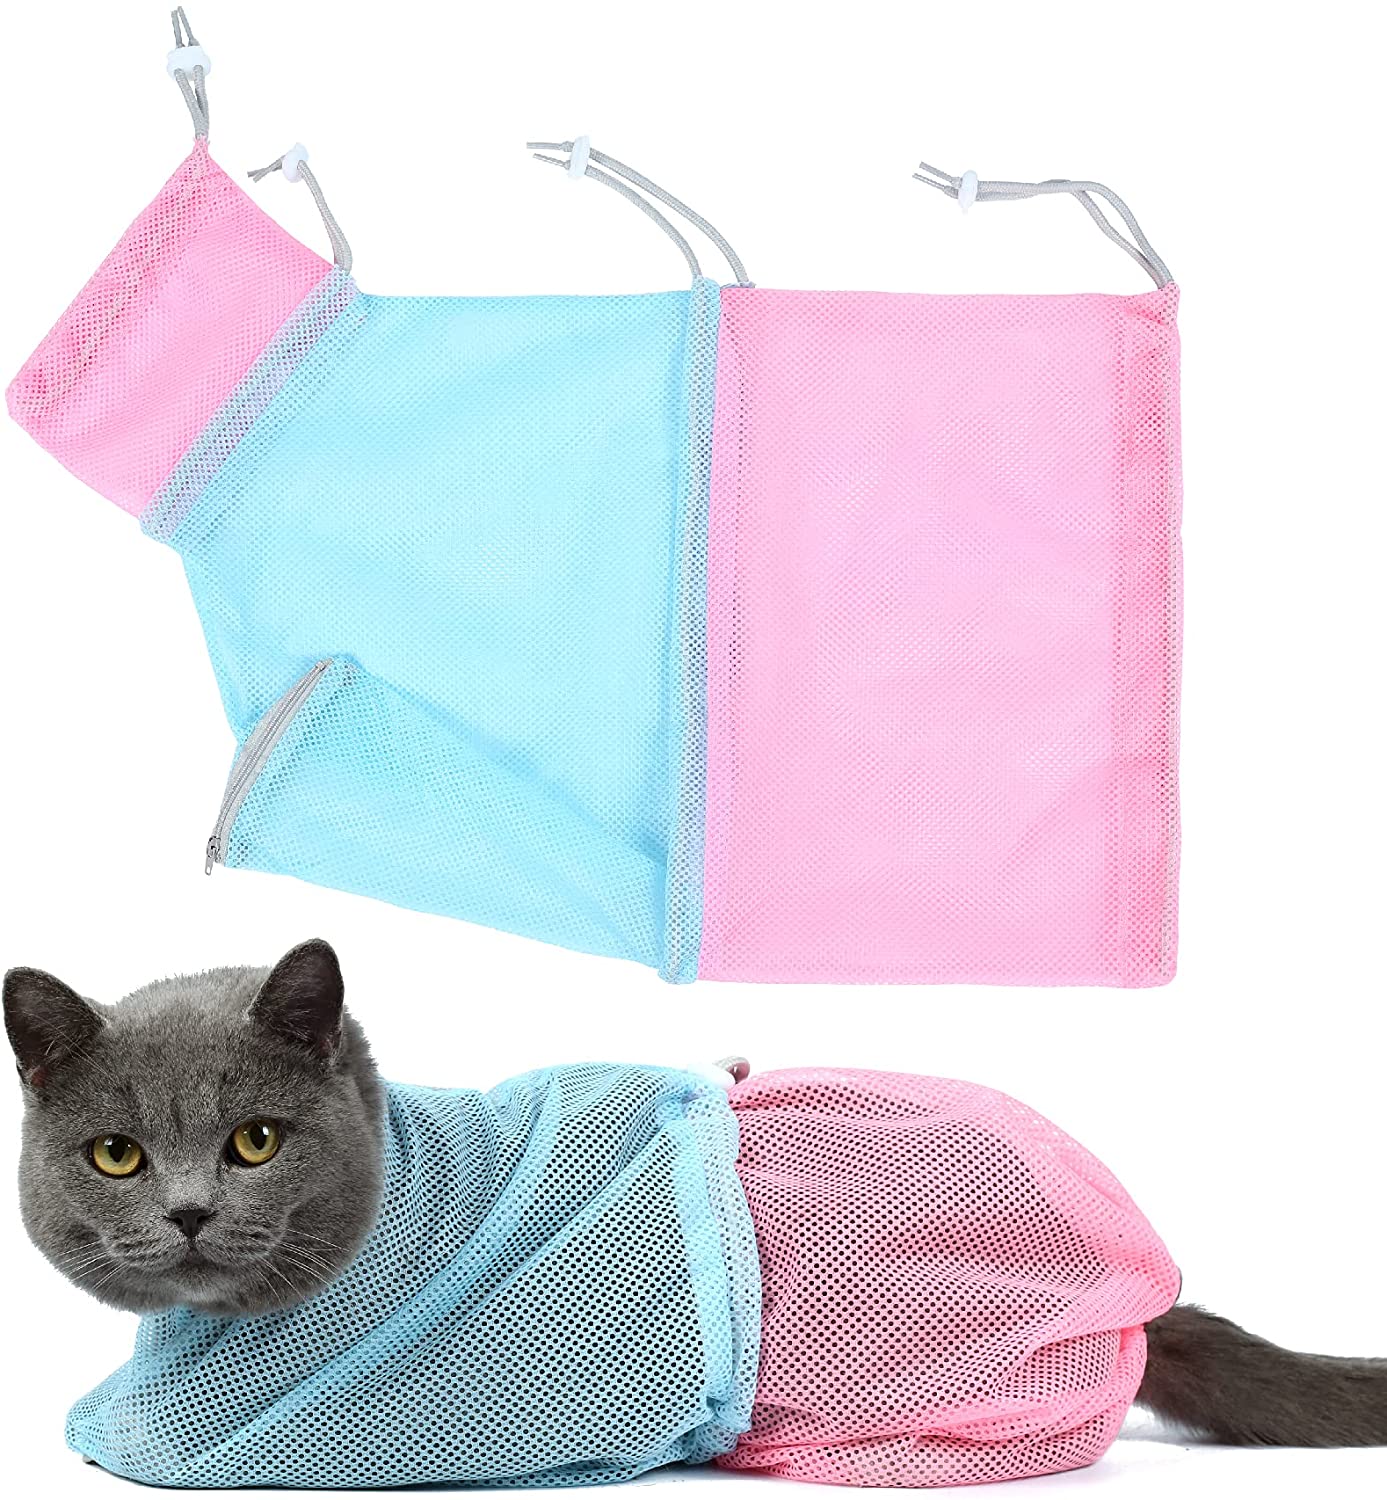 Cat Restraint Bag | For Nail Trims, Injections, or Blood Draws